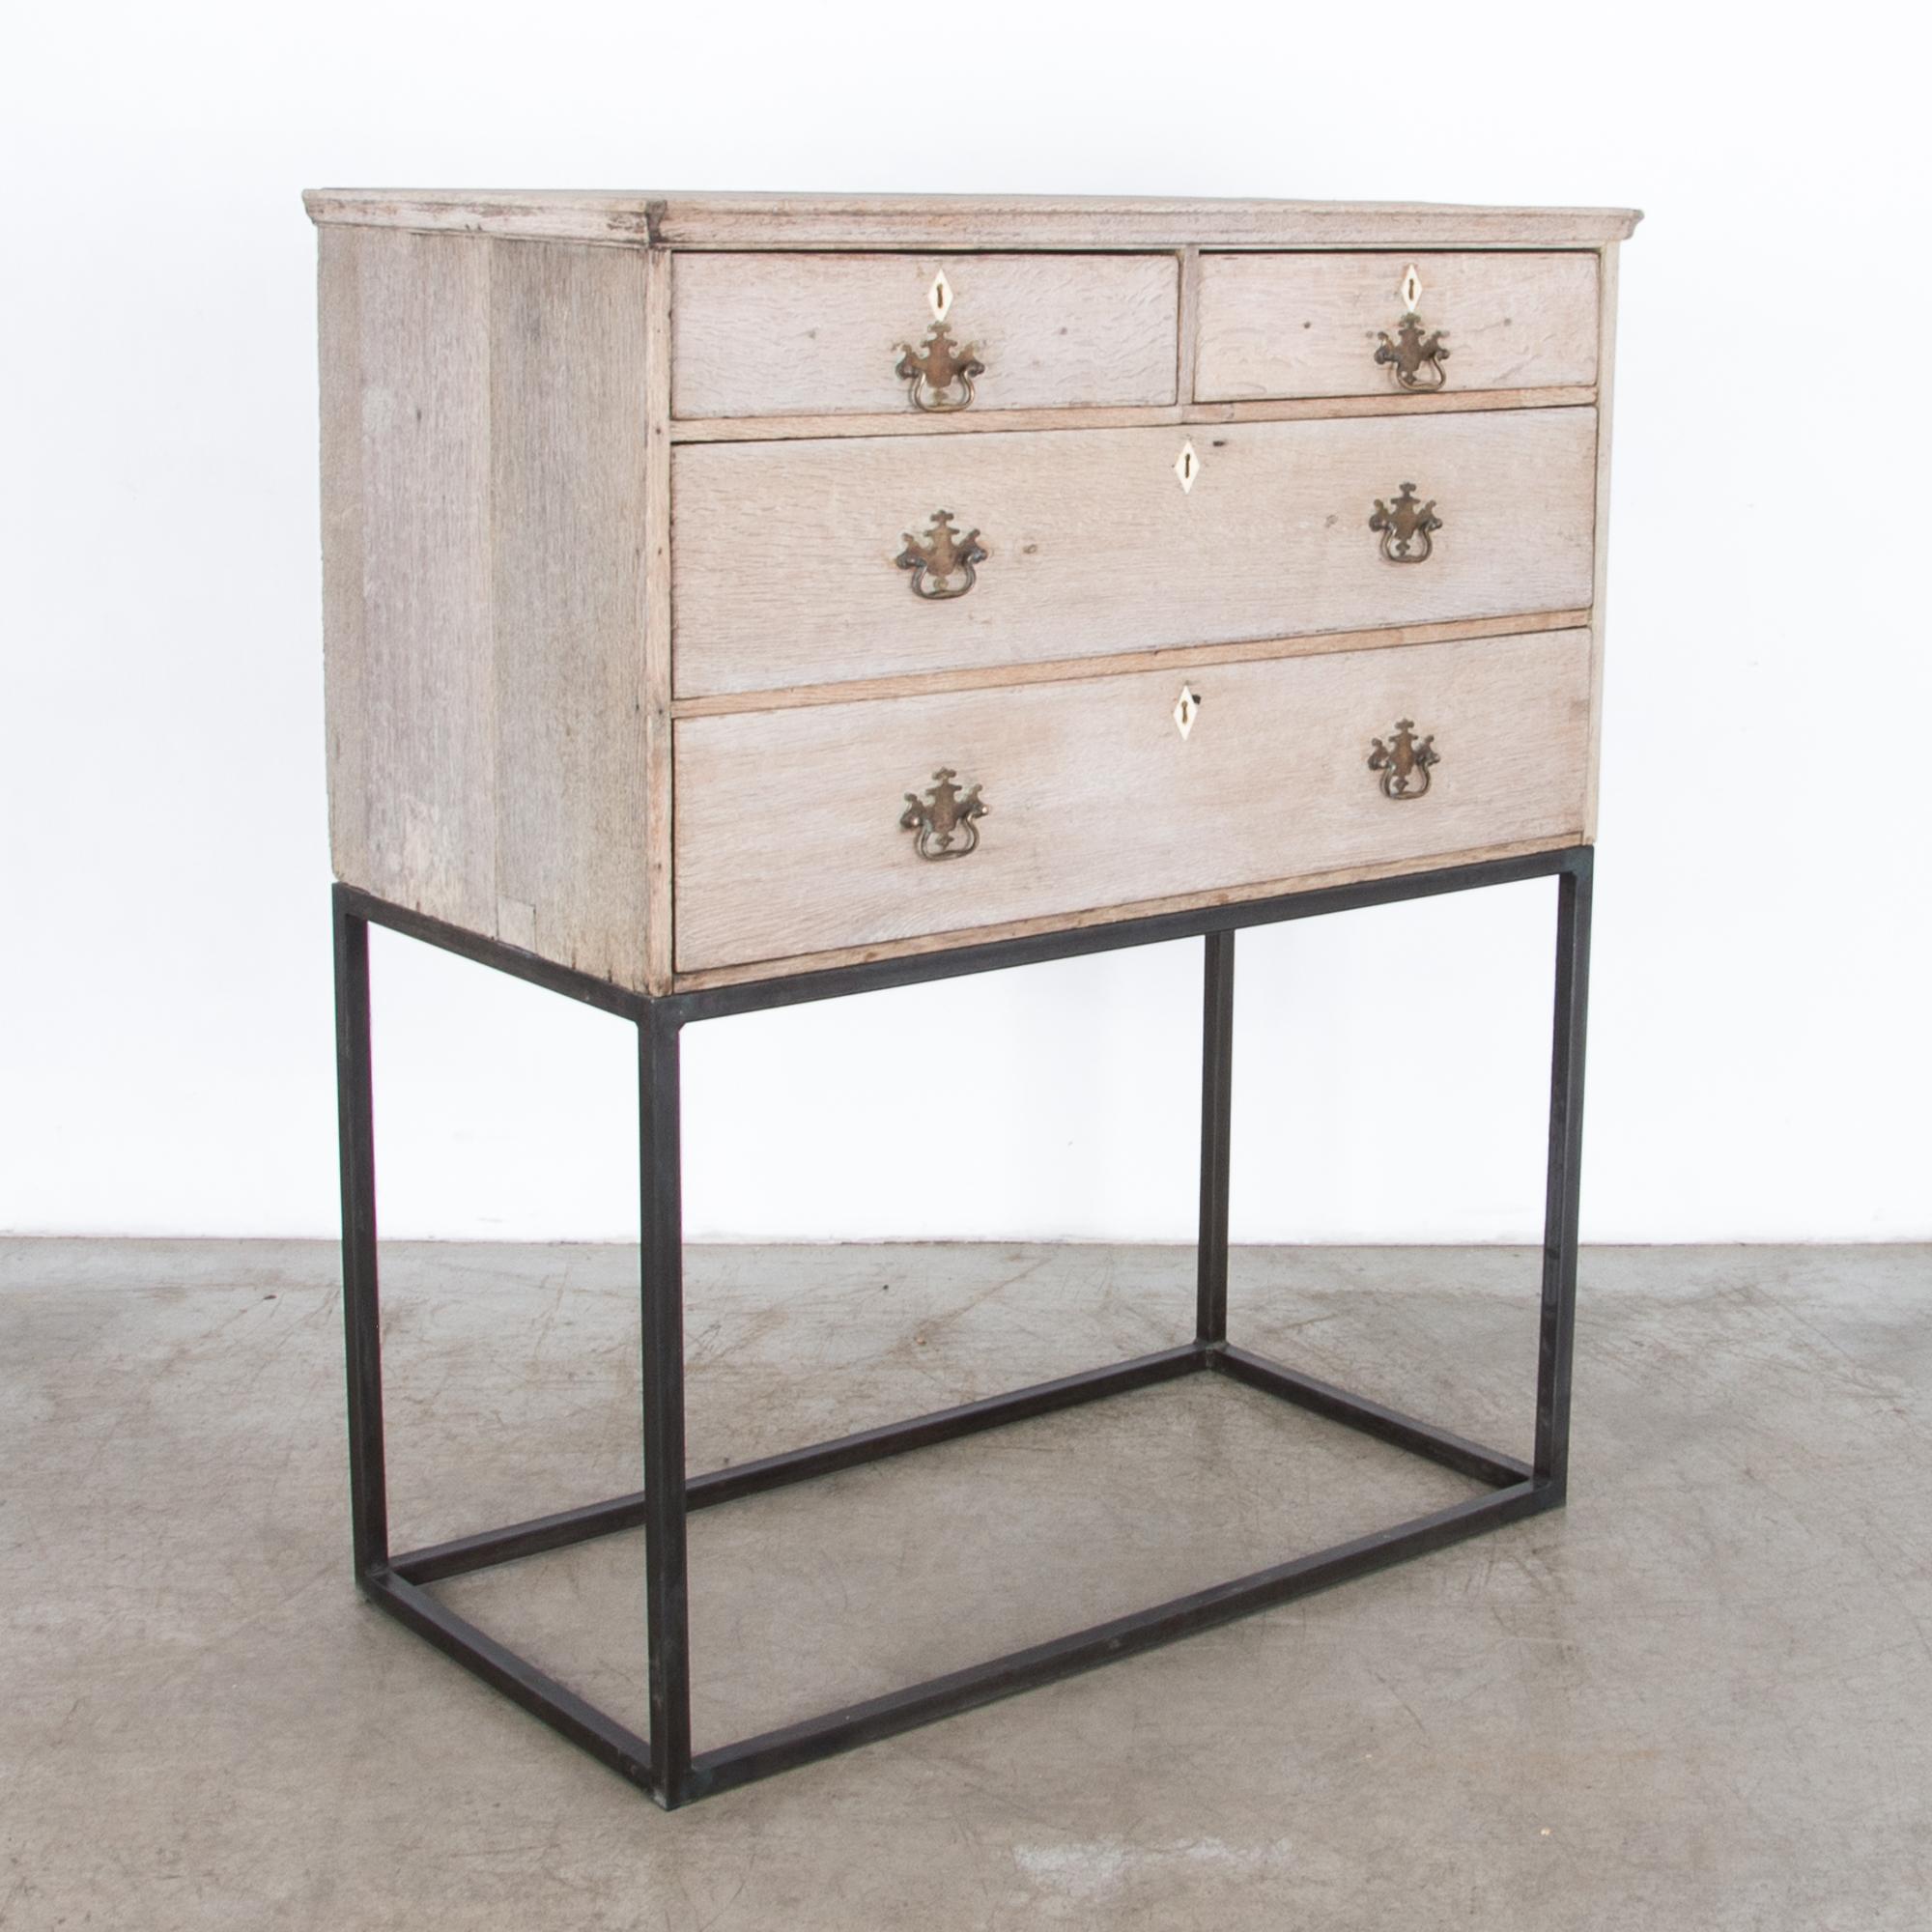 British Oak Chest of Drawers on Steel Base